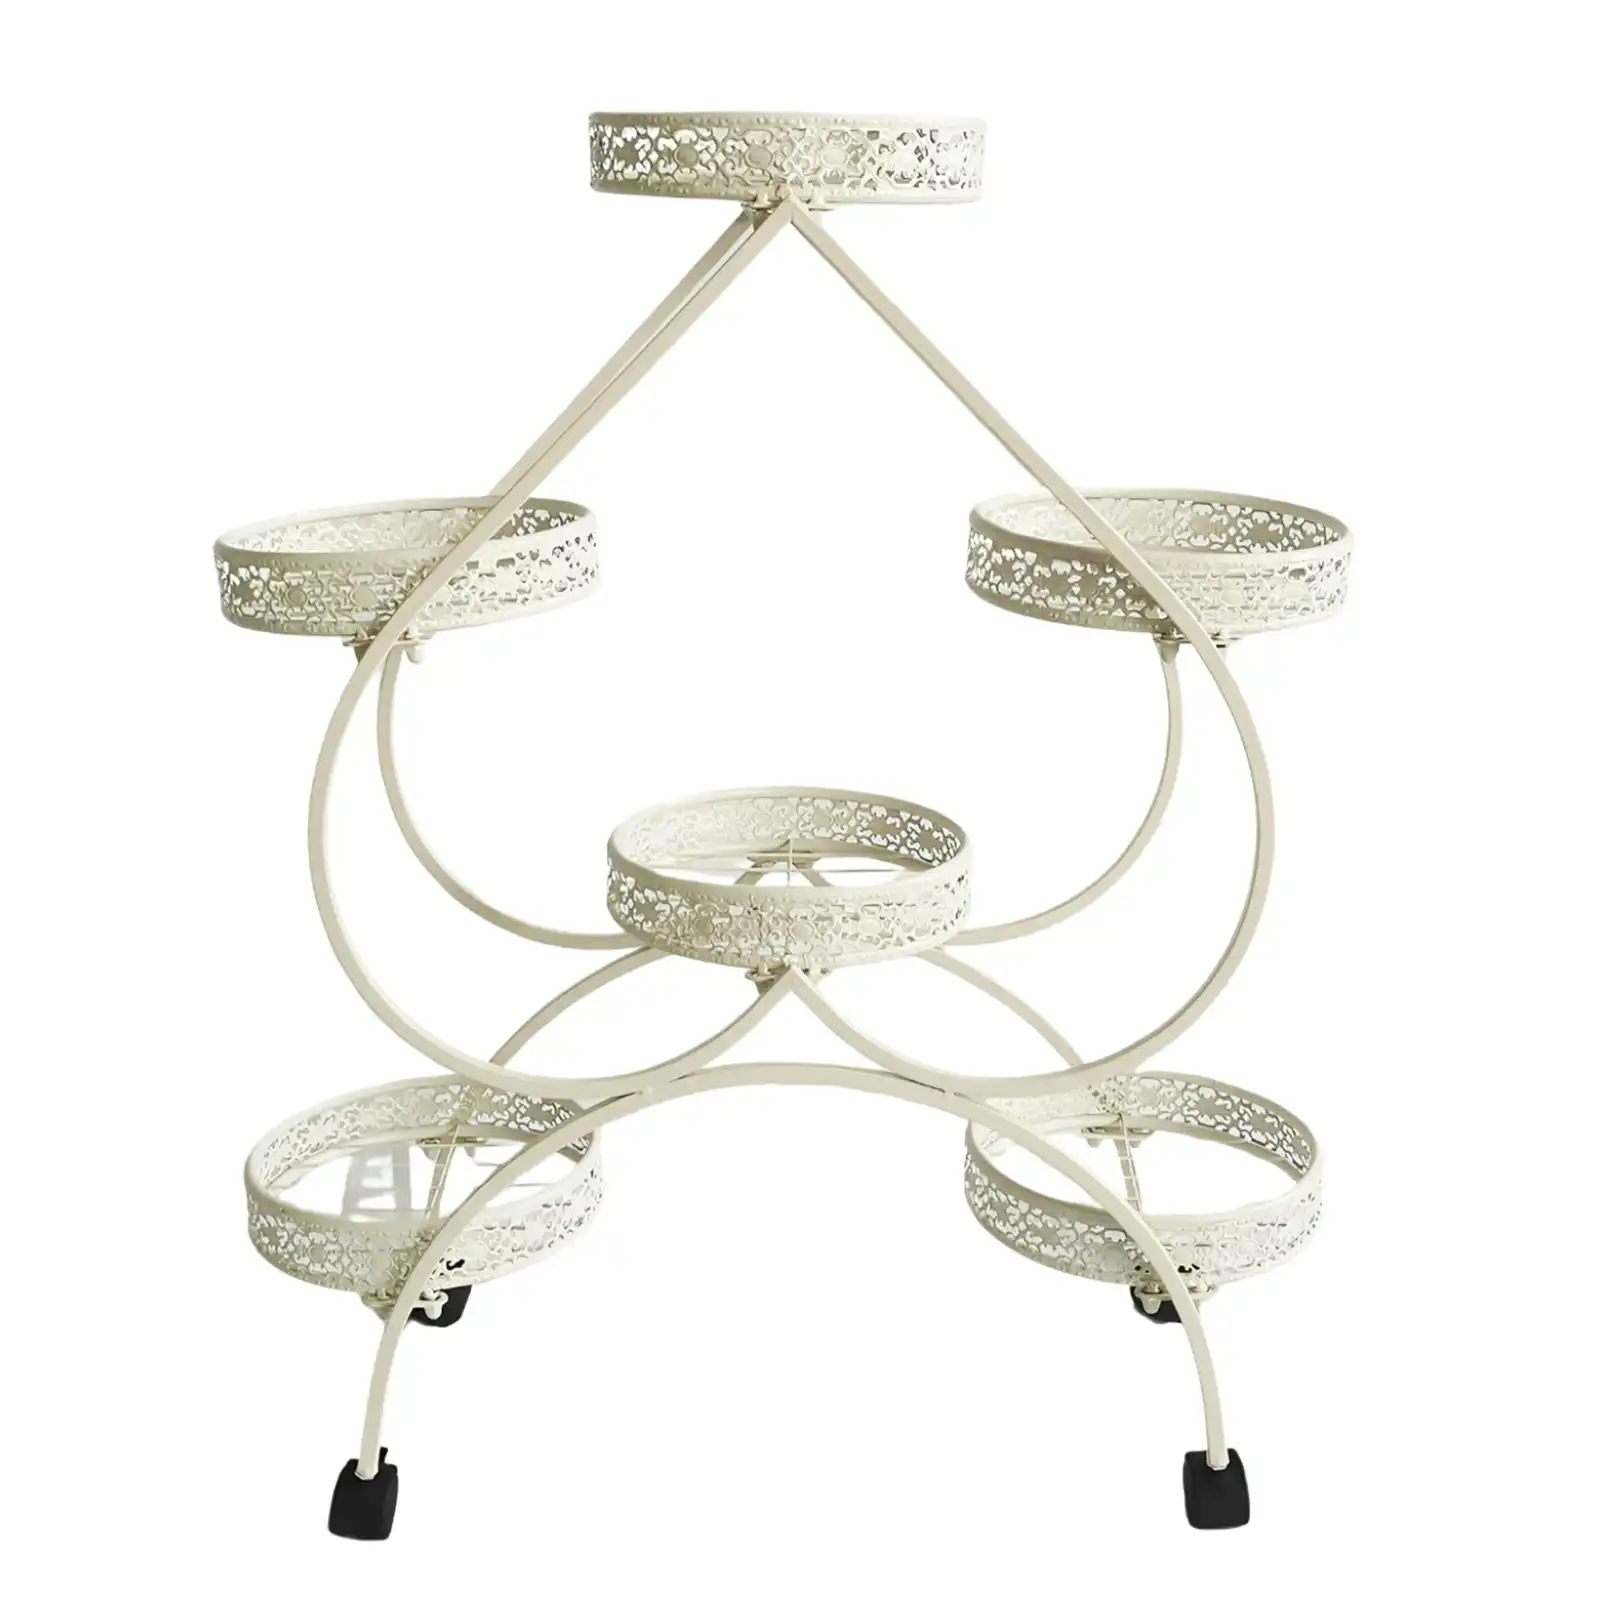 Viviendo 4 Tiers 6 Flower Potted Holders Indoor Metal Plant Stand with Wheels - Spades White